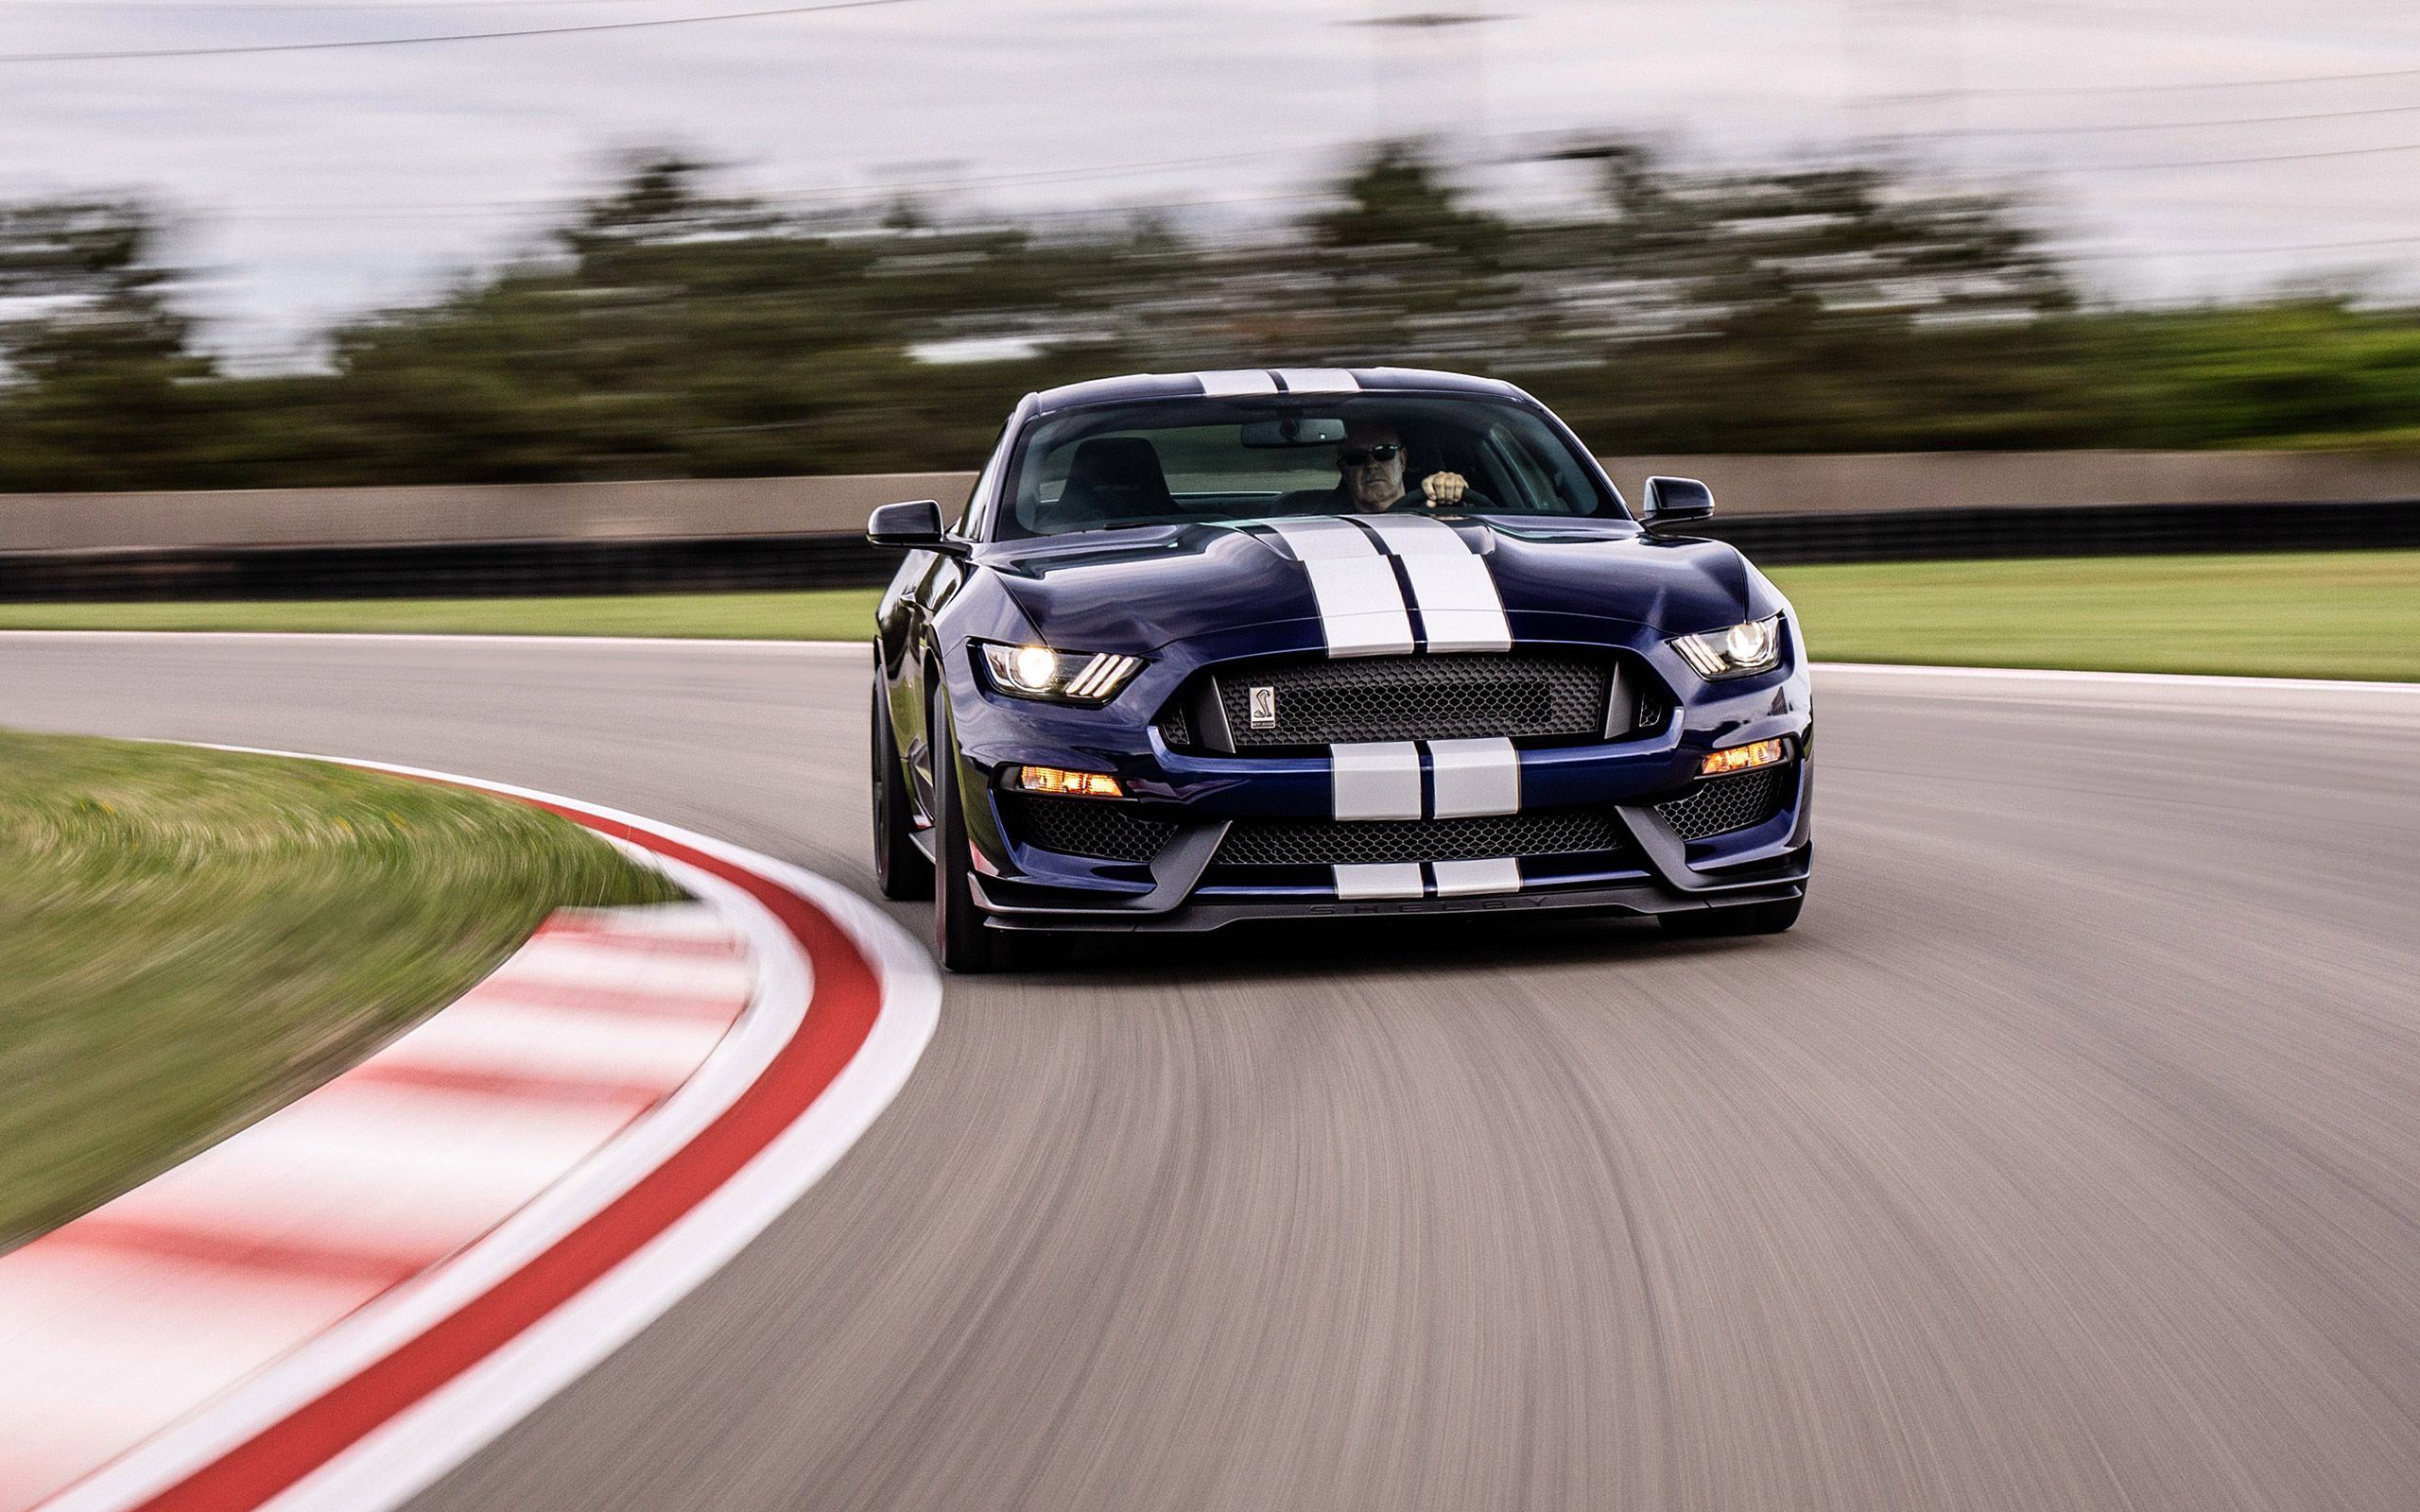 2019-Ford-Mustang-Shelby-GT350-002-1600